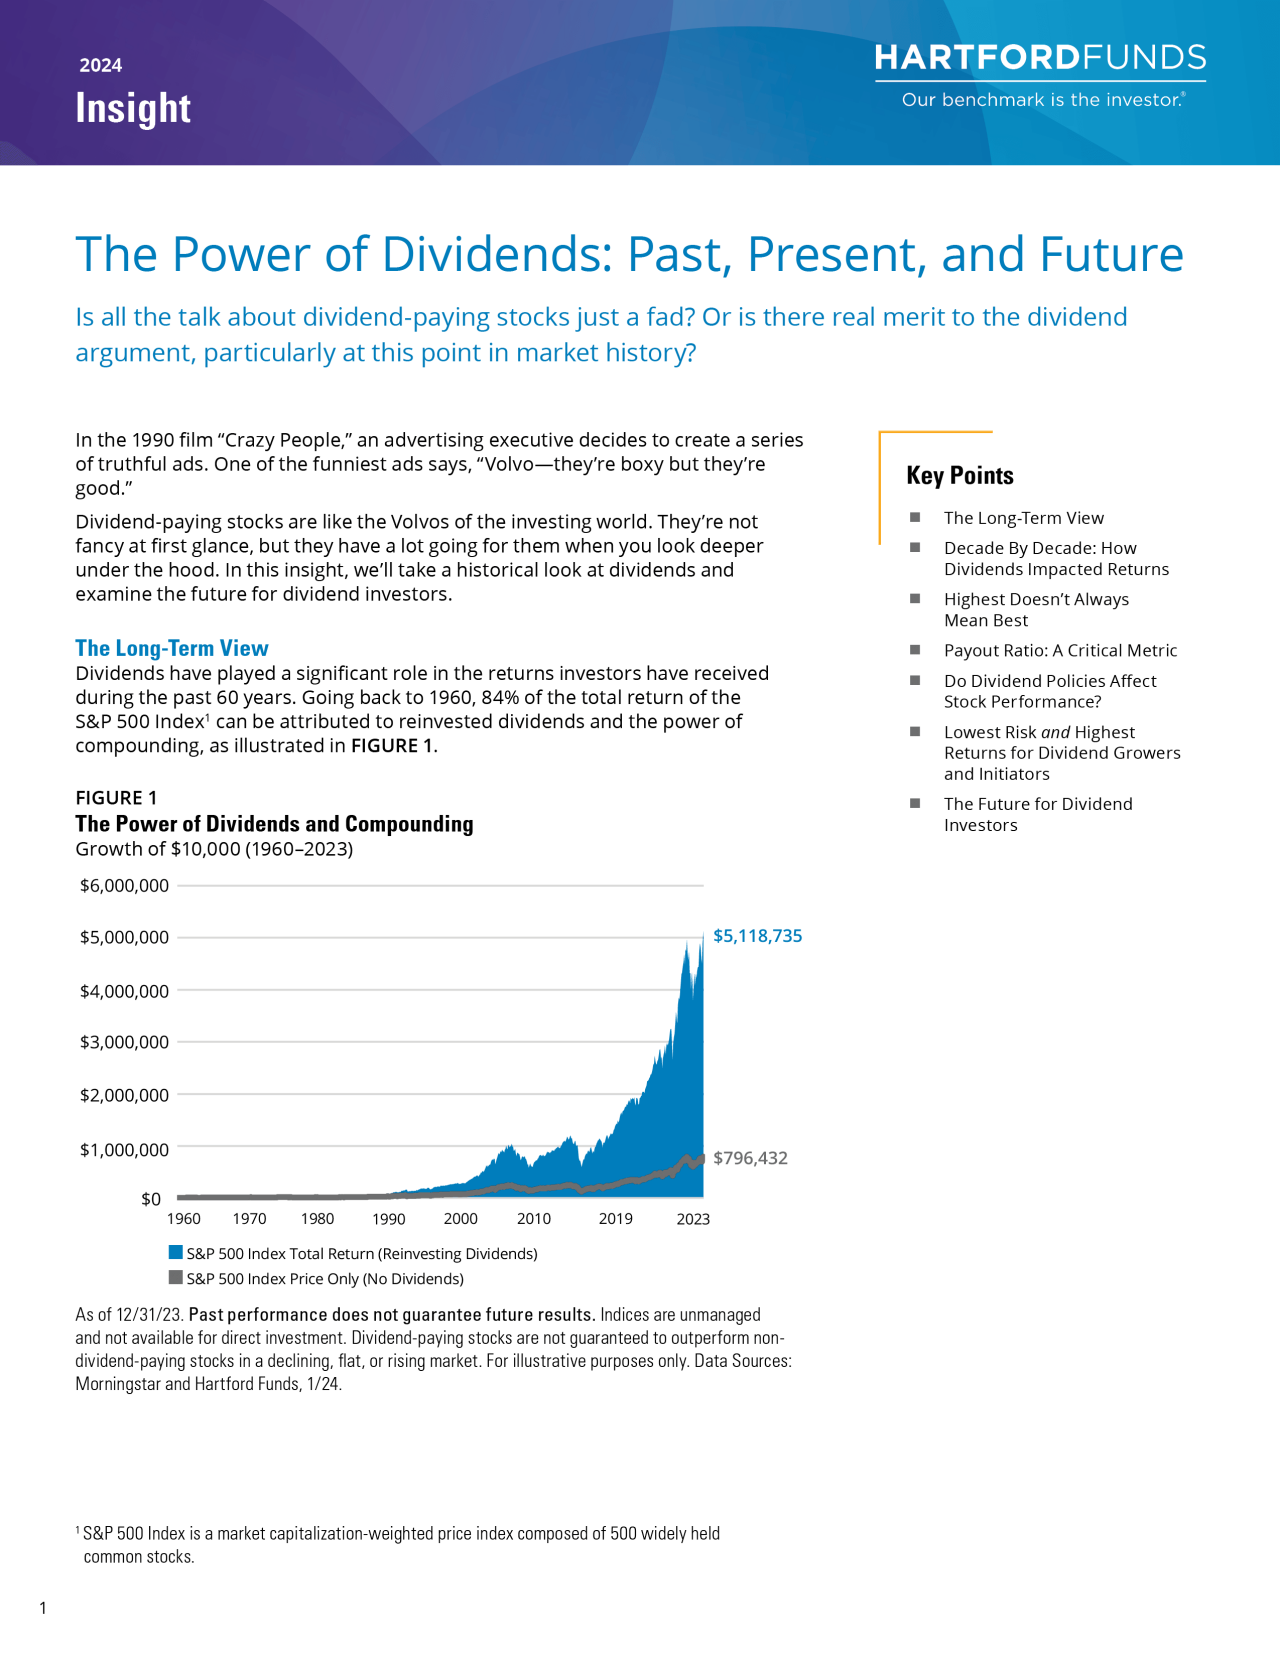 The Power of Dividends Past, Present, and Future - cover image